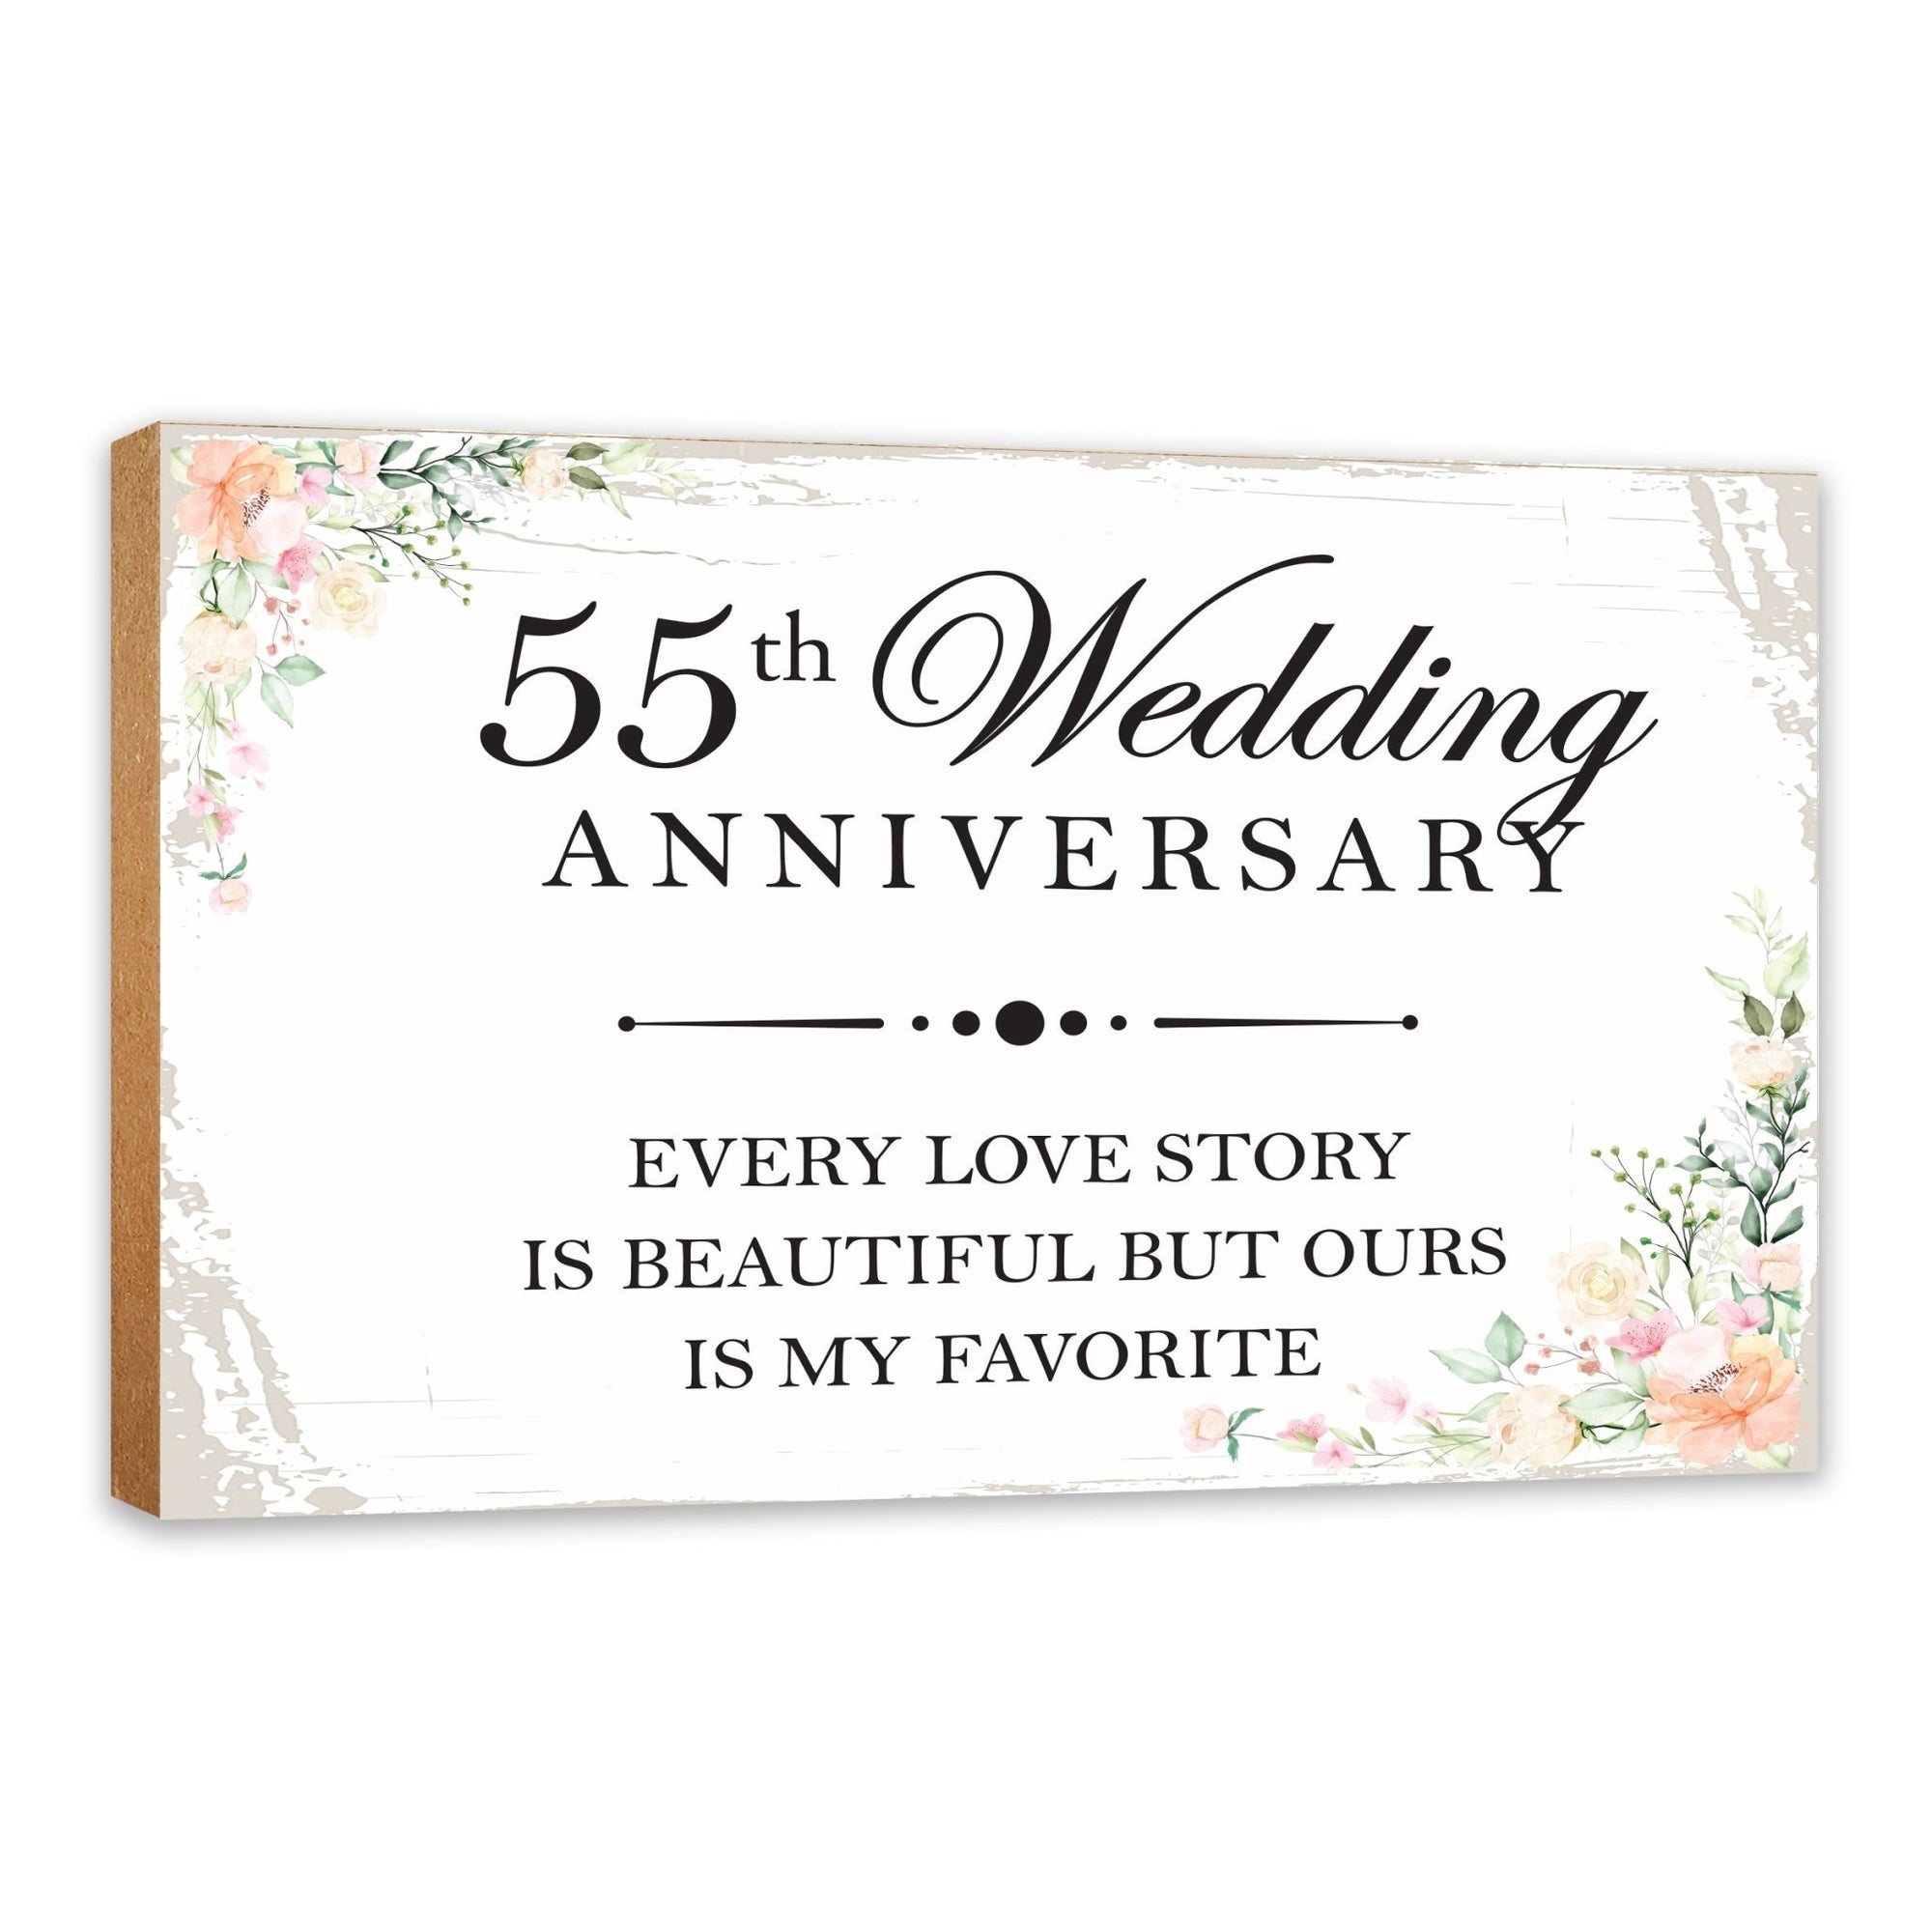 55th Wedding Anniversary Unique Shelf Decor and Tabletop Signs Gifts for Couples - Every Love Story - LifeSong Milestones